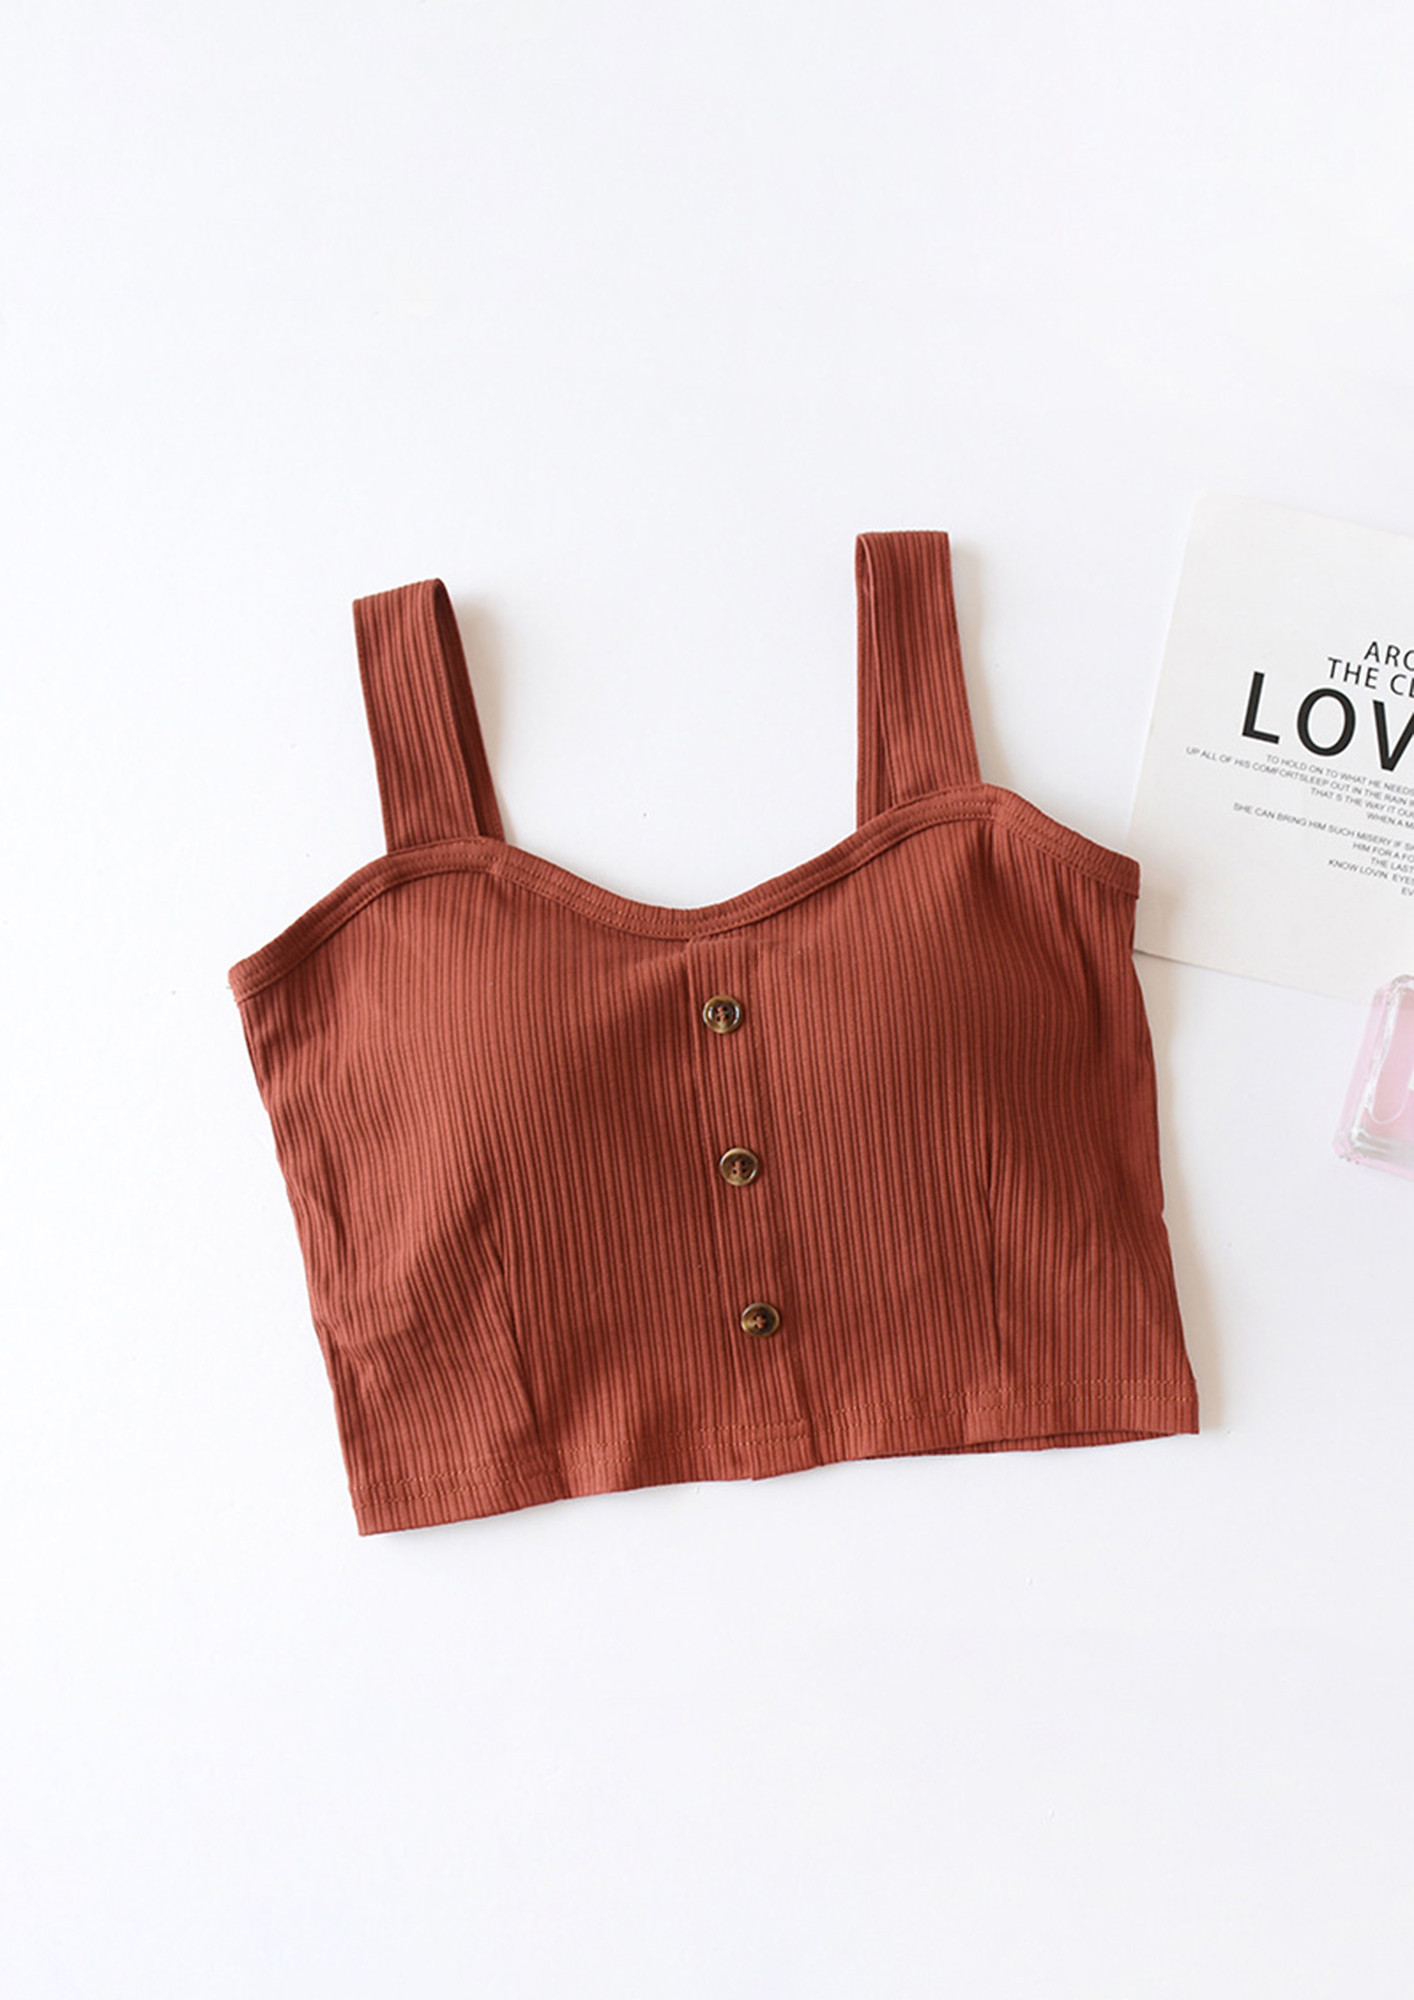 FALL IS COMING BRICK RED CROP TOP